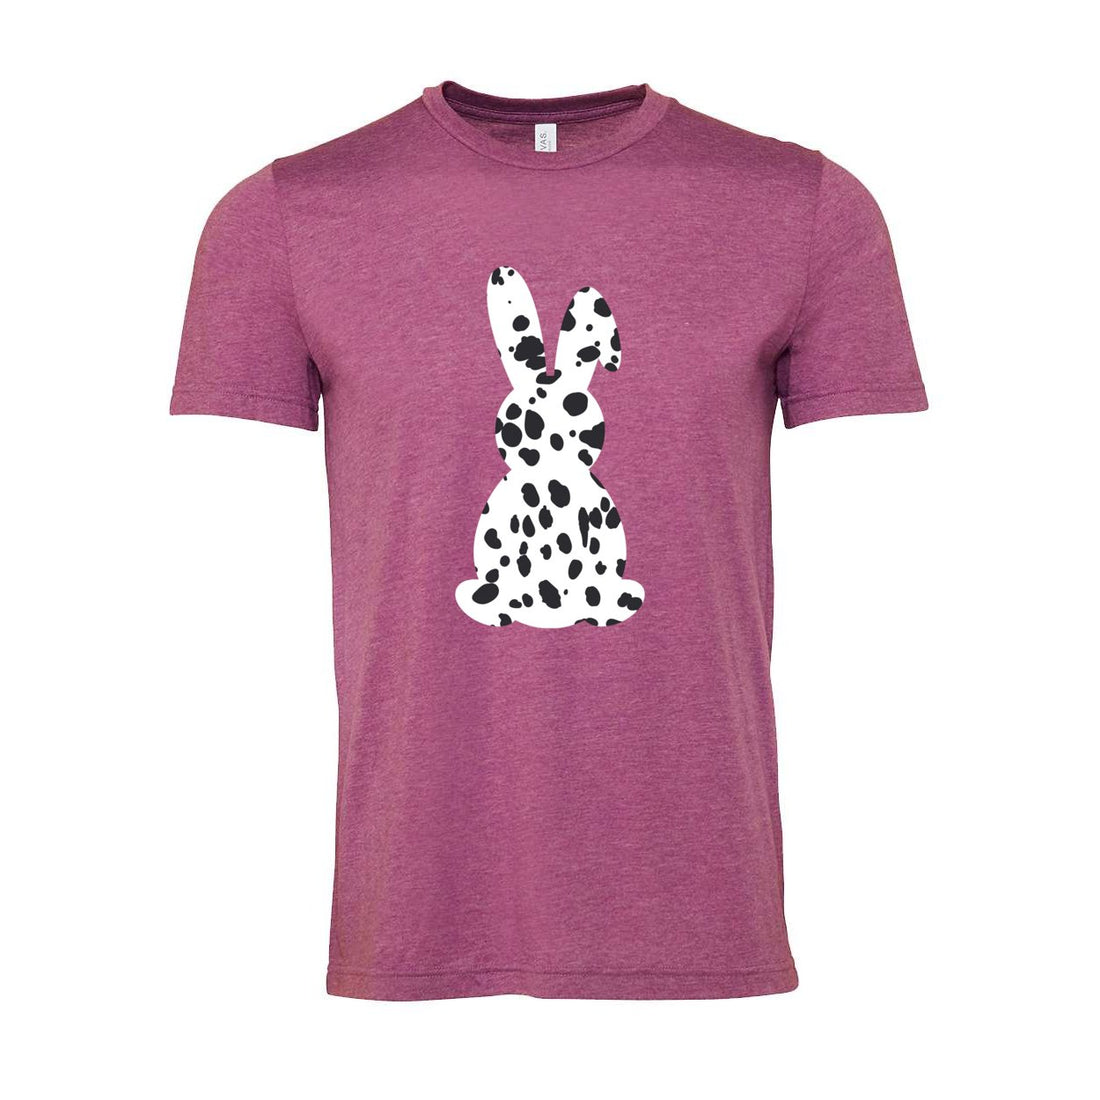 Spotted Bunny Tee - T-Shirts - Positively Sassy - Spotted Bunny Tee